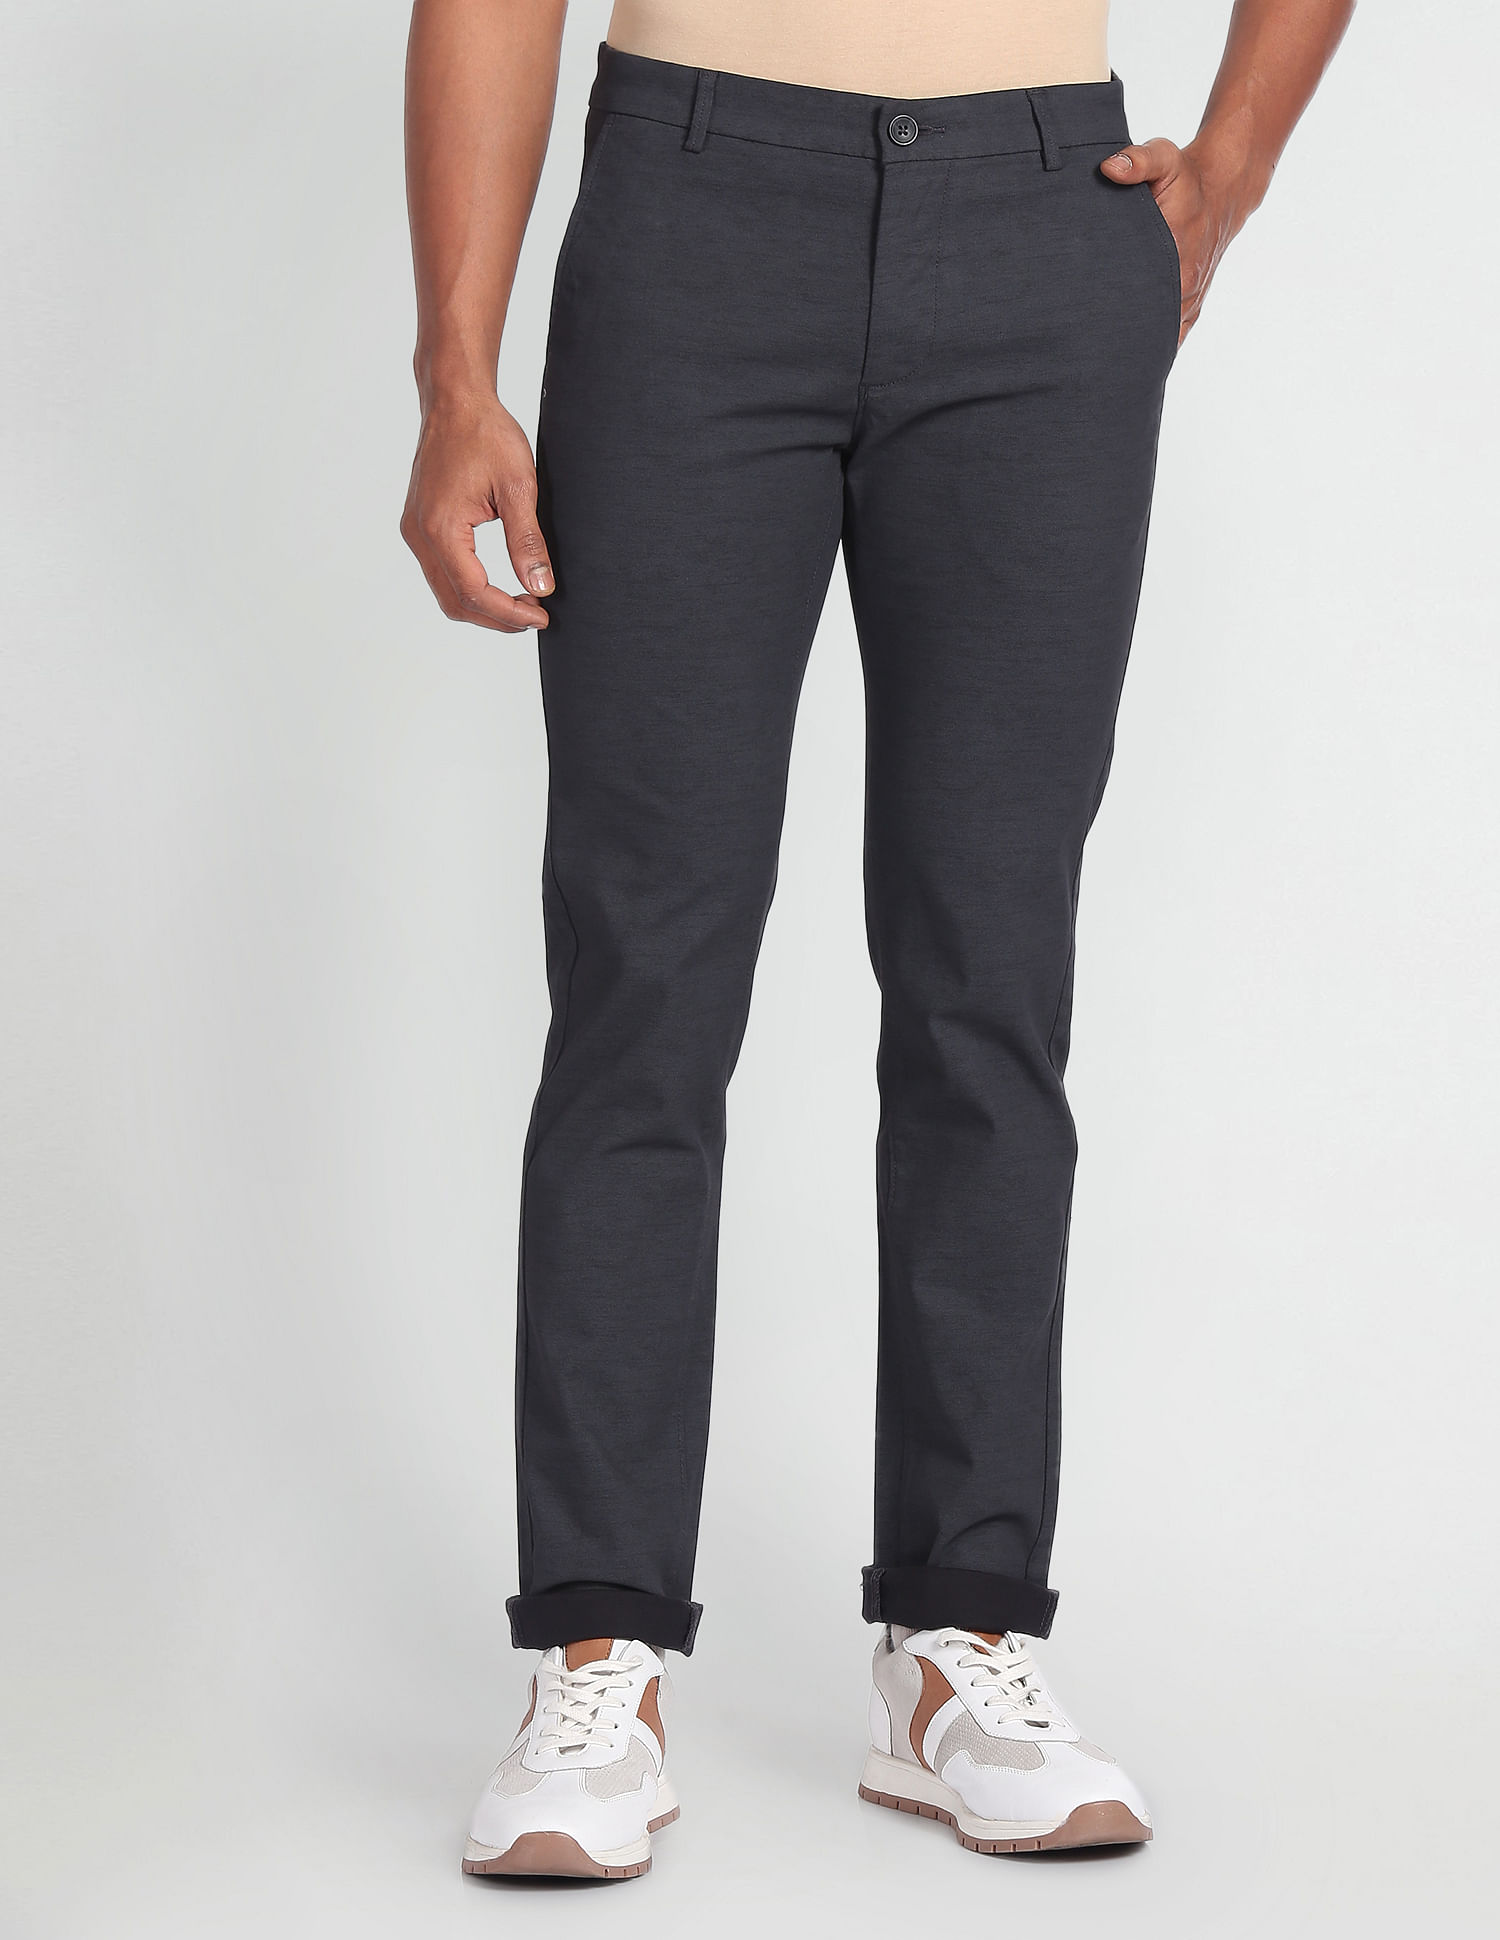 Buy Arrow Sports Mid Rise Solid Trousers - NNNOW.com